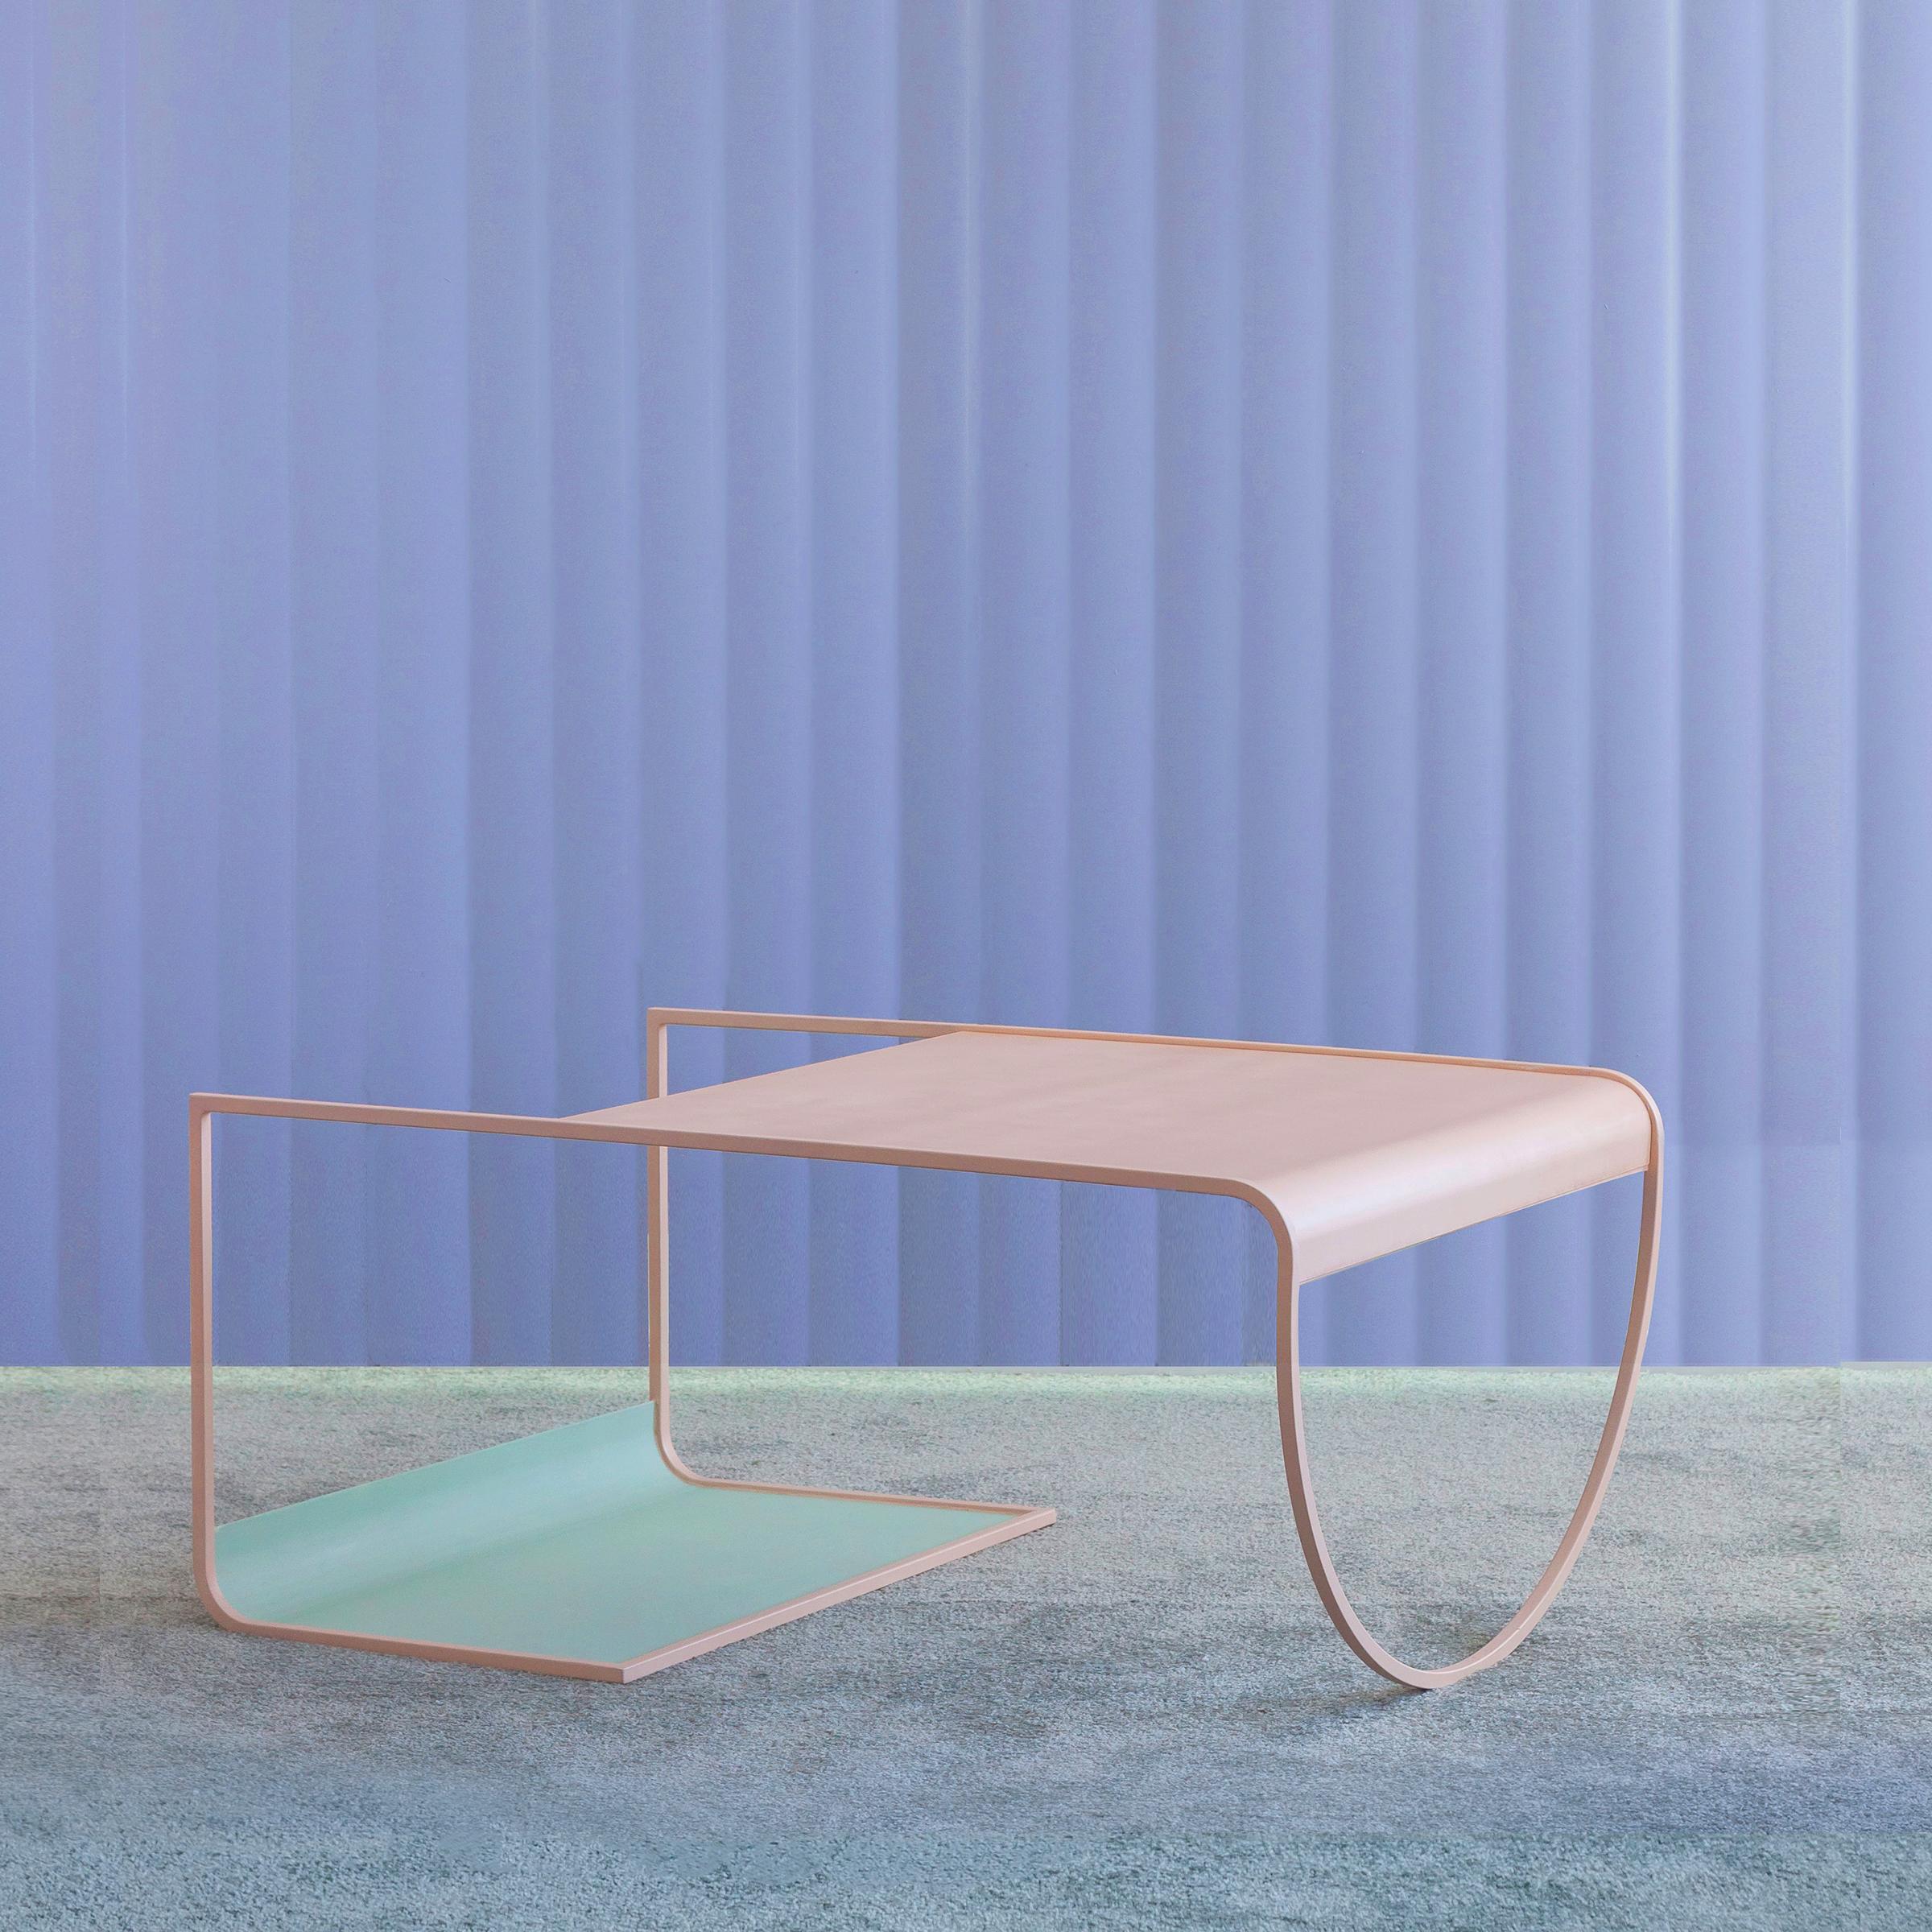 SW coffee table by Soft-geometry
Materials: Steel
Dimensions: 36 x 24.5 x 17” H 

Simple, playful geometries form the light and fluid SW geometric coffee table in powder coated steel. Perched on an arched-belly base on one side and a rolled rack